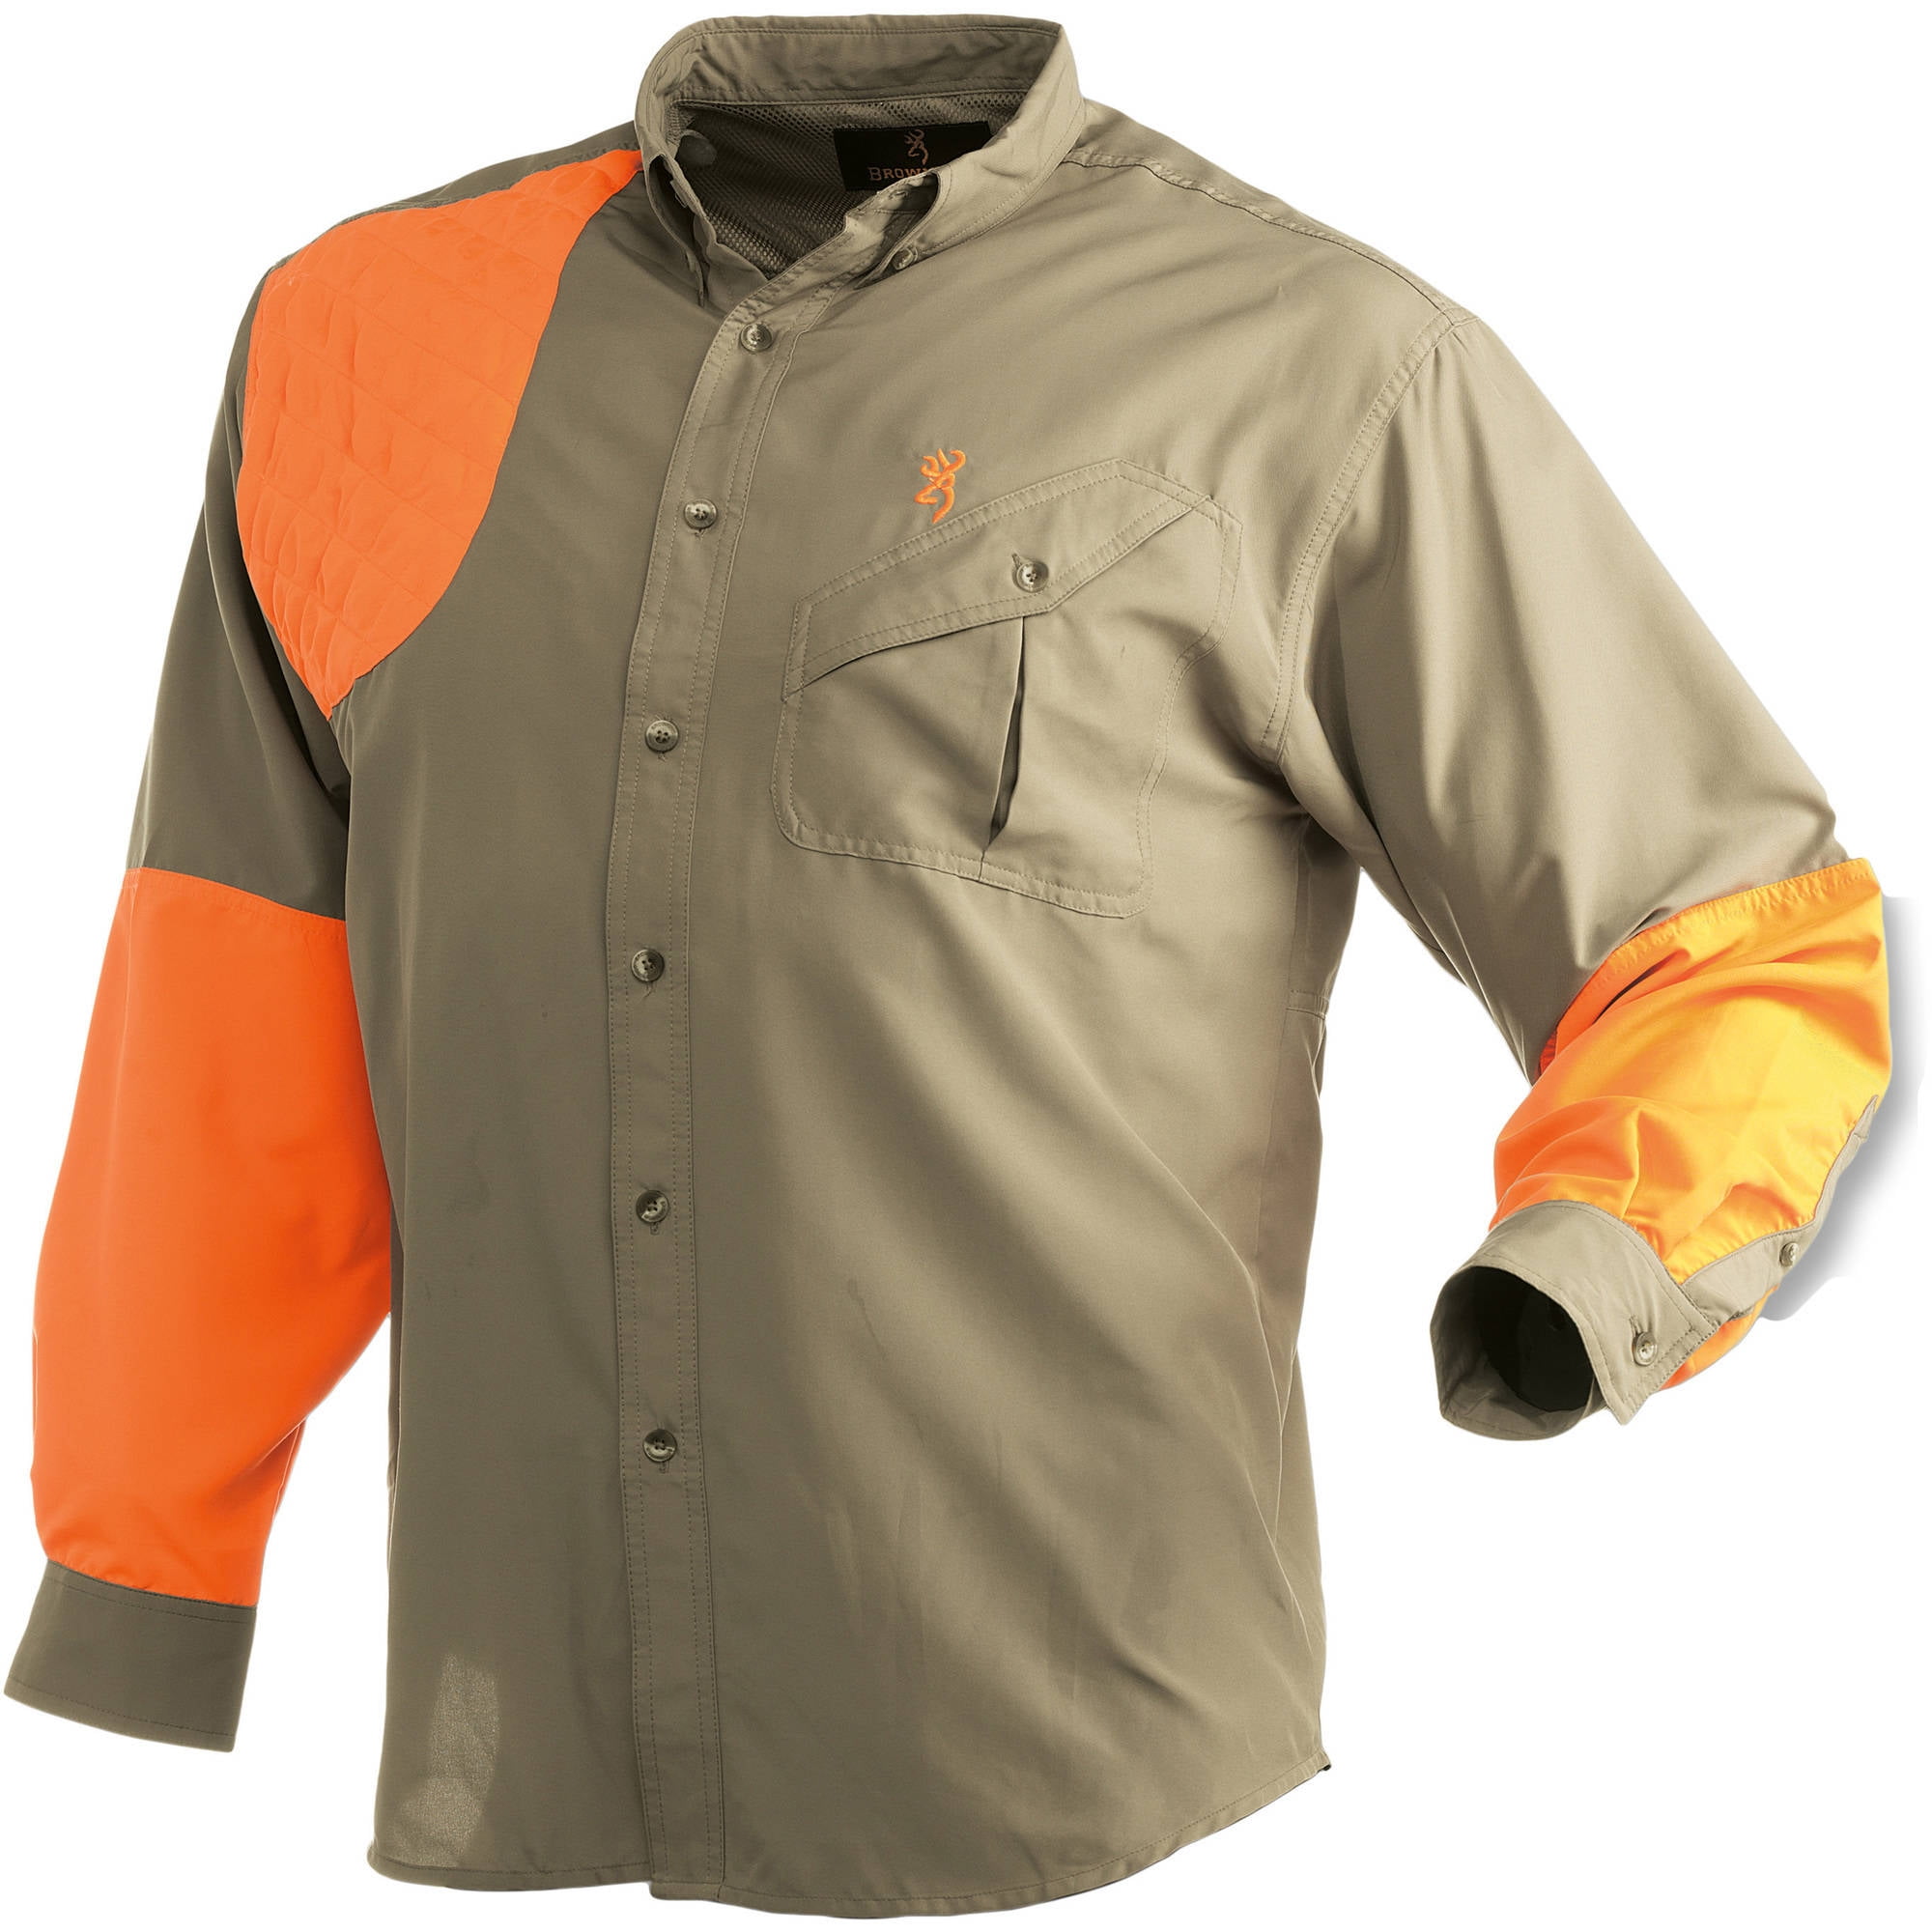 NEW BROWNING CROSS COUNTRY LONG SLEEVE BUTTON UP UPLAND HUNTING SHIRT